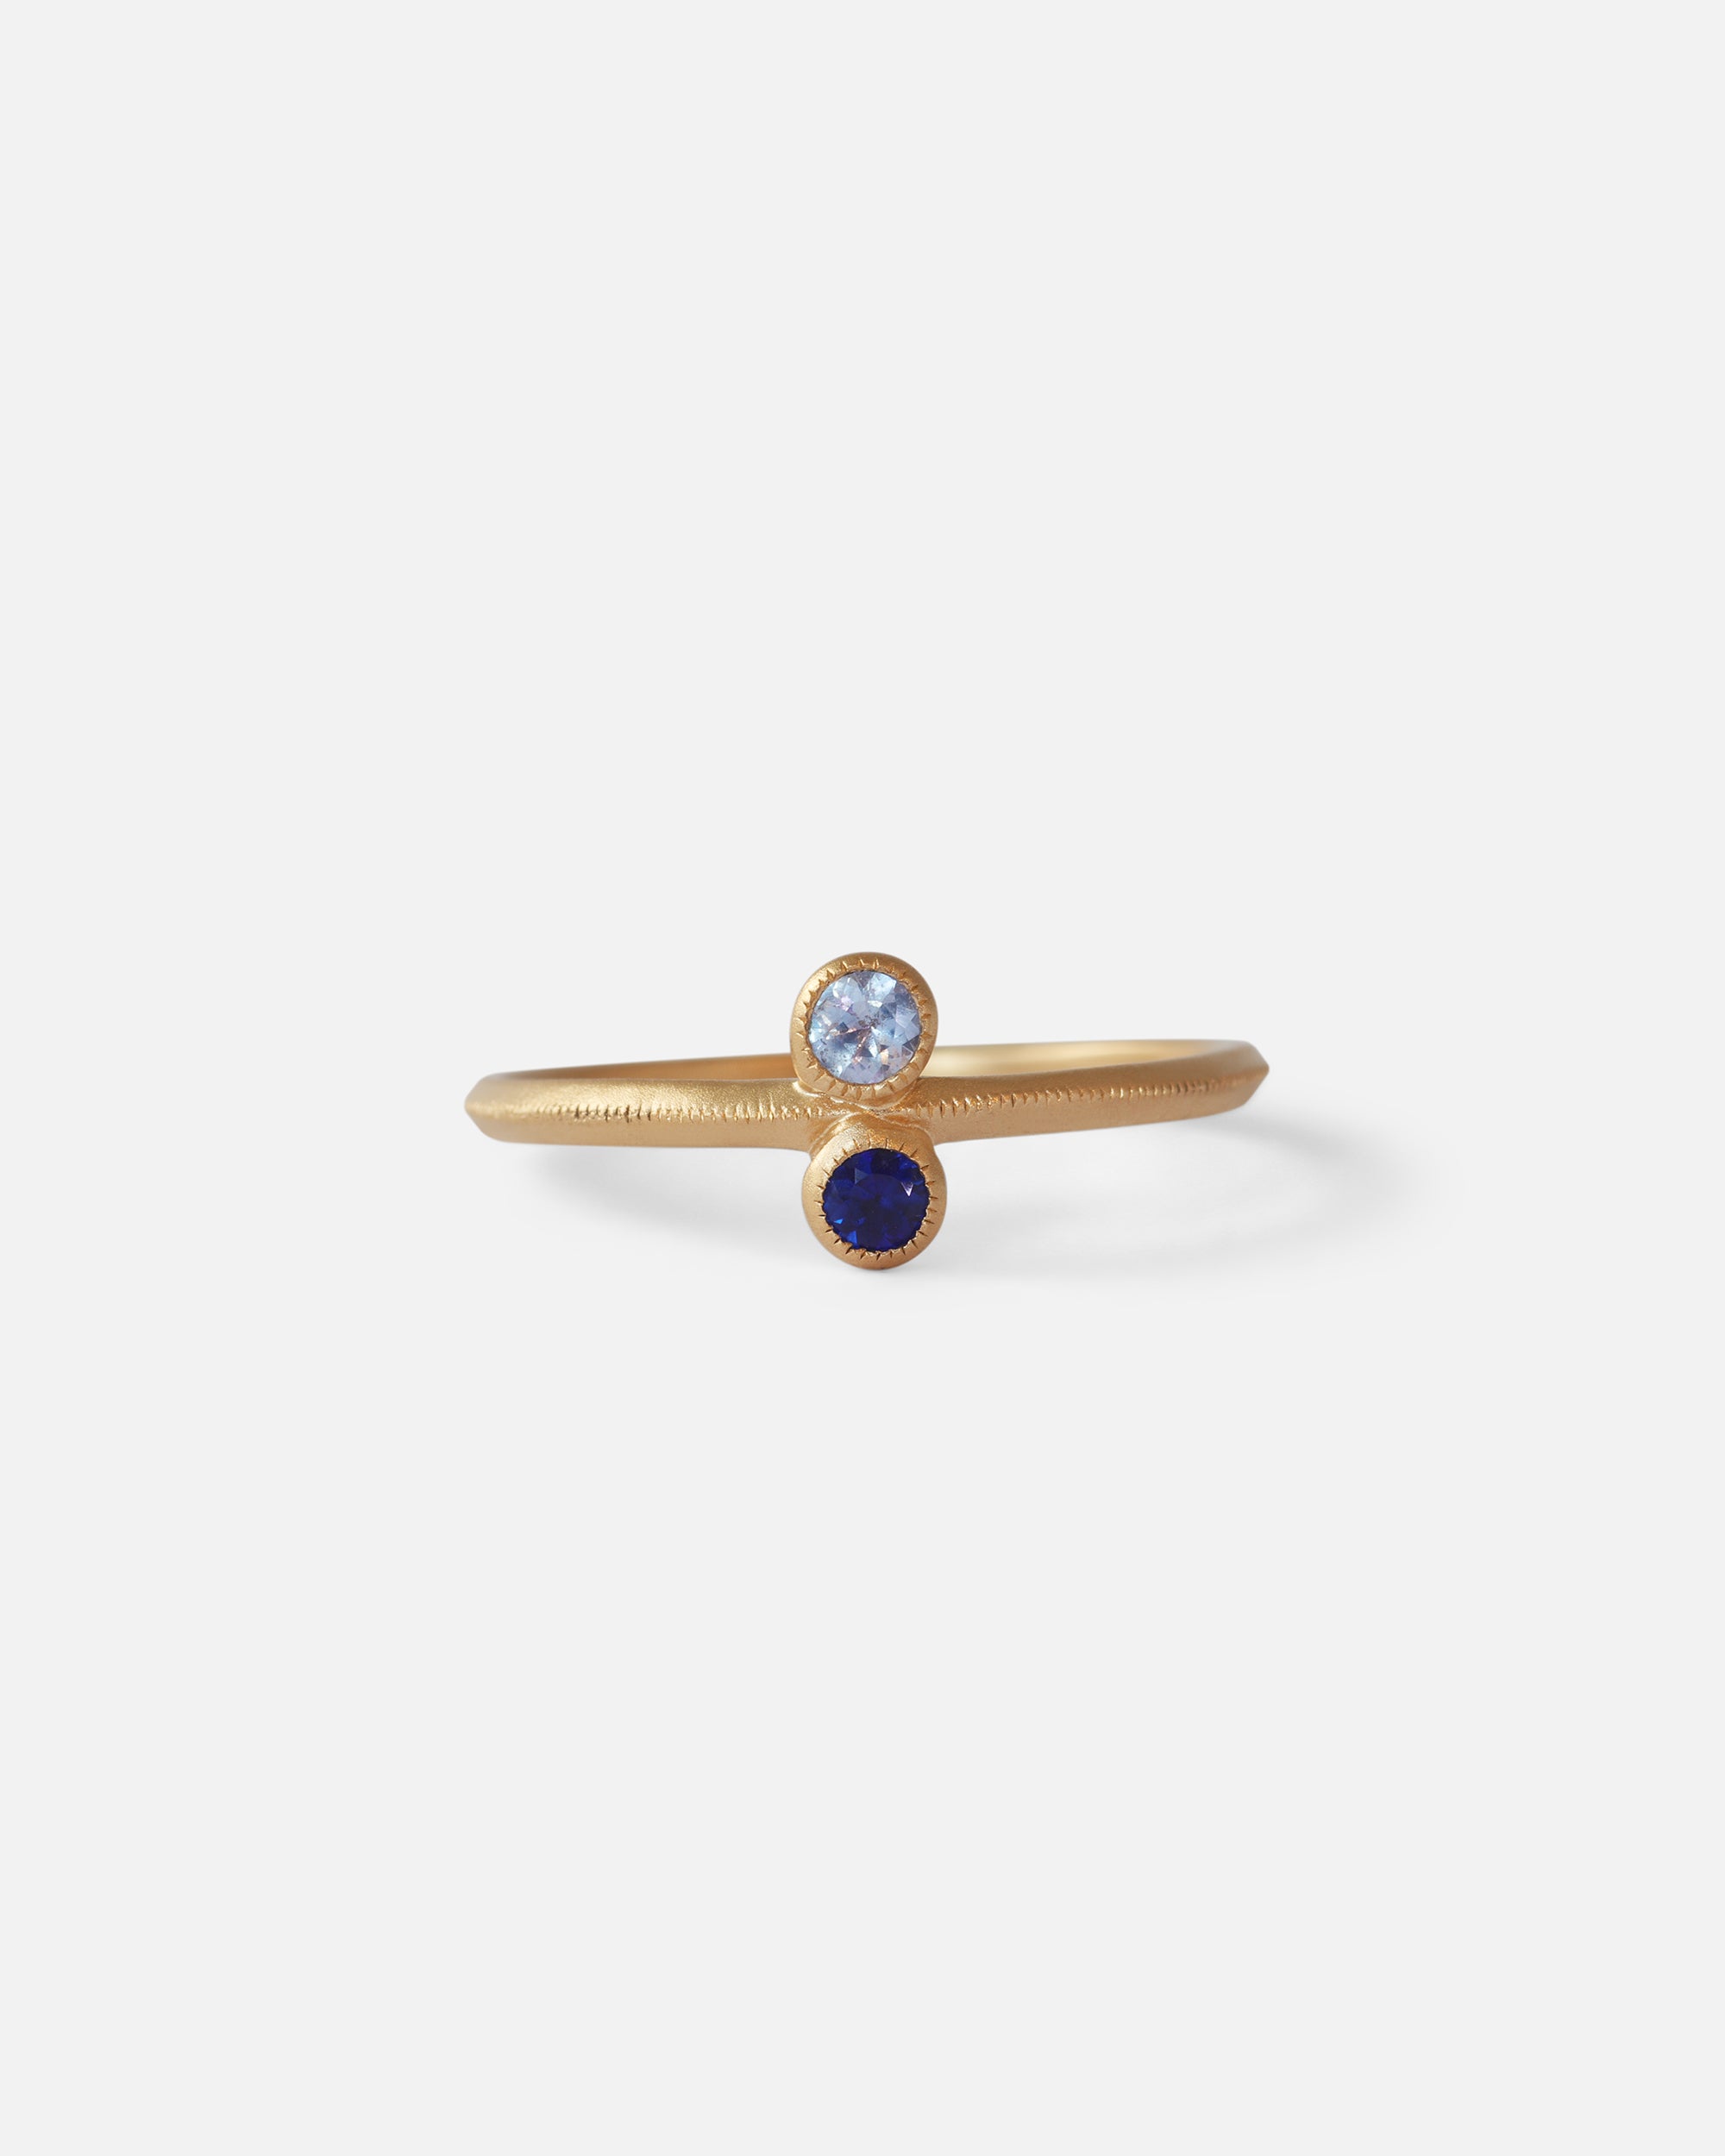 Melee Ball / Toi et Moi / Blue and Light Blue Sapphire Ring By fitzgerald jewelry in rings Category